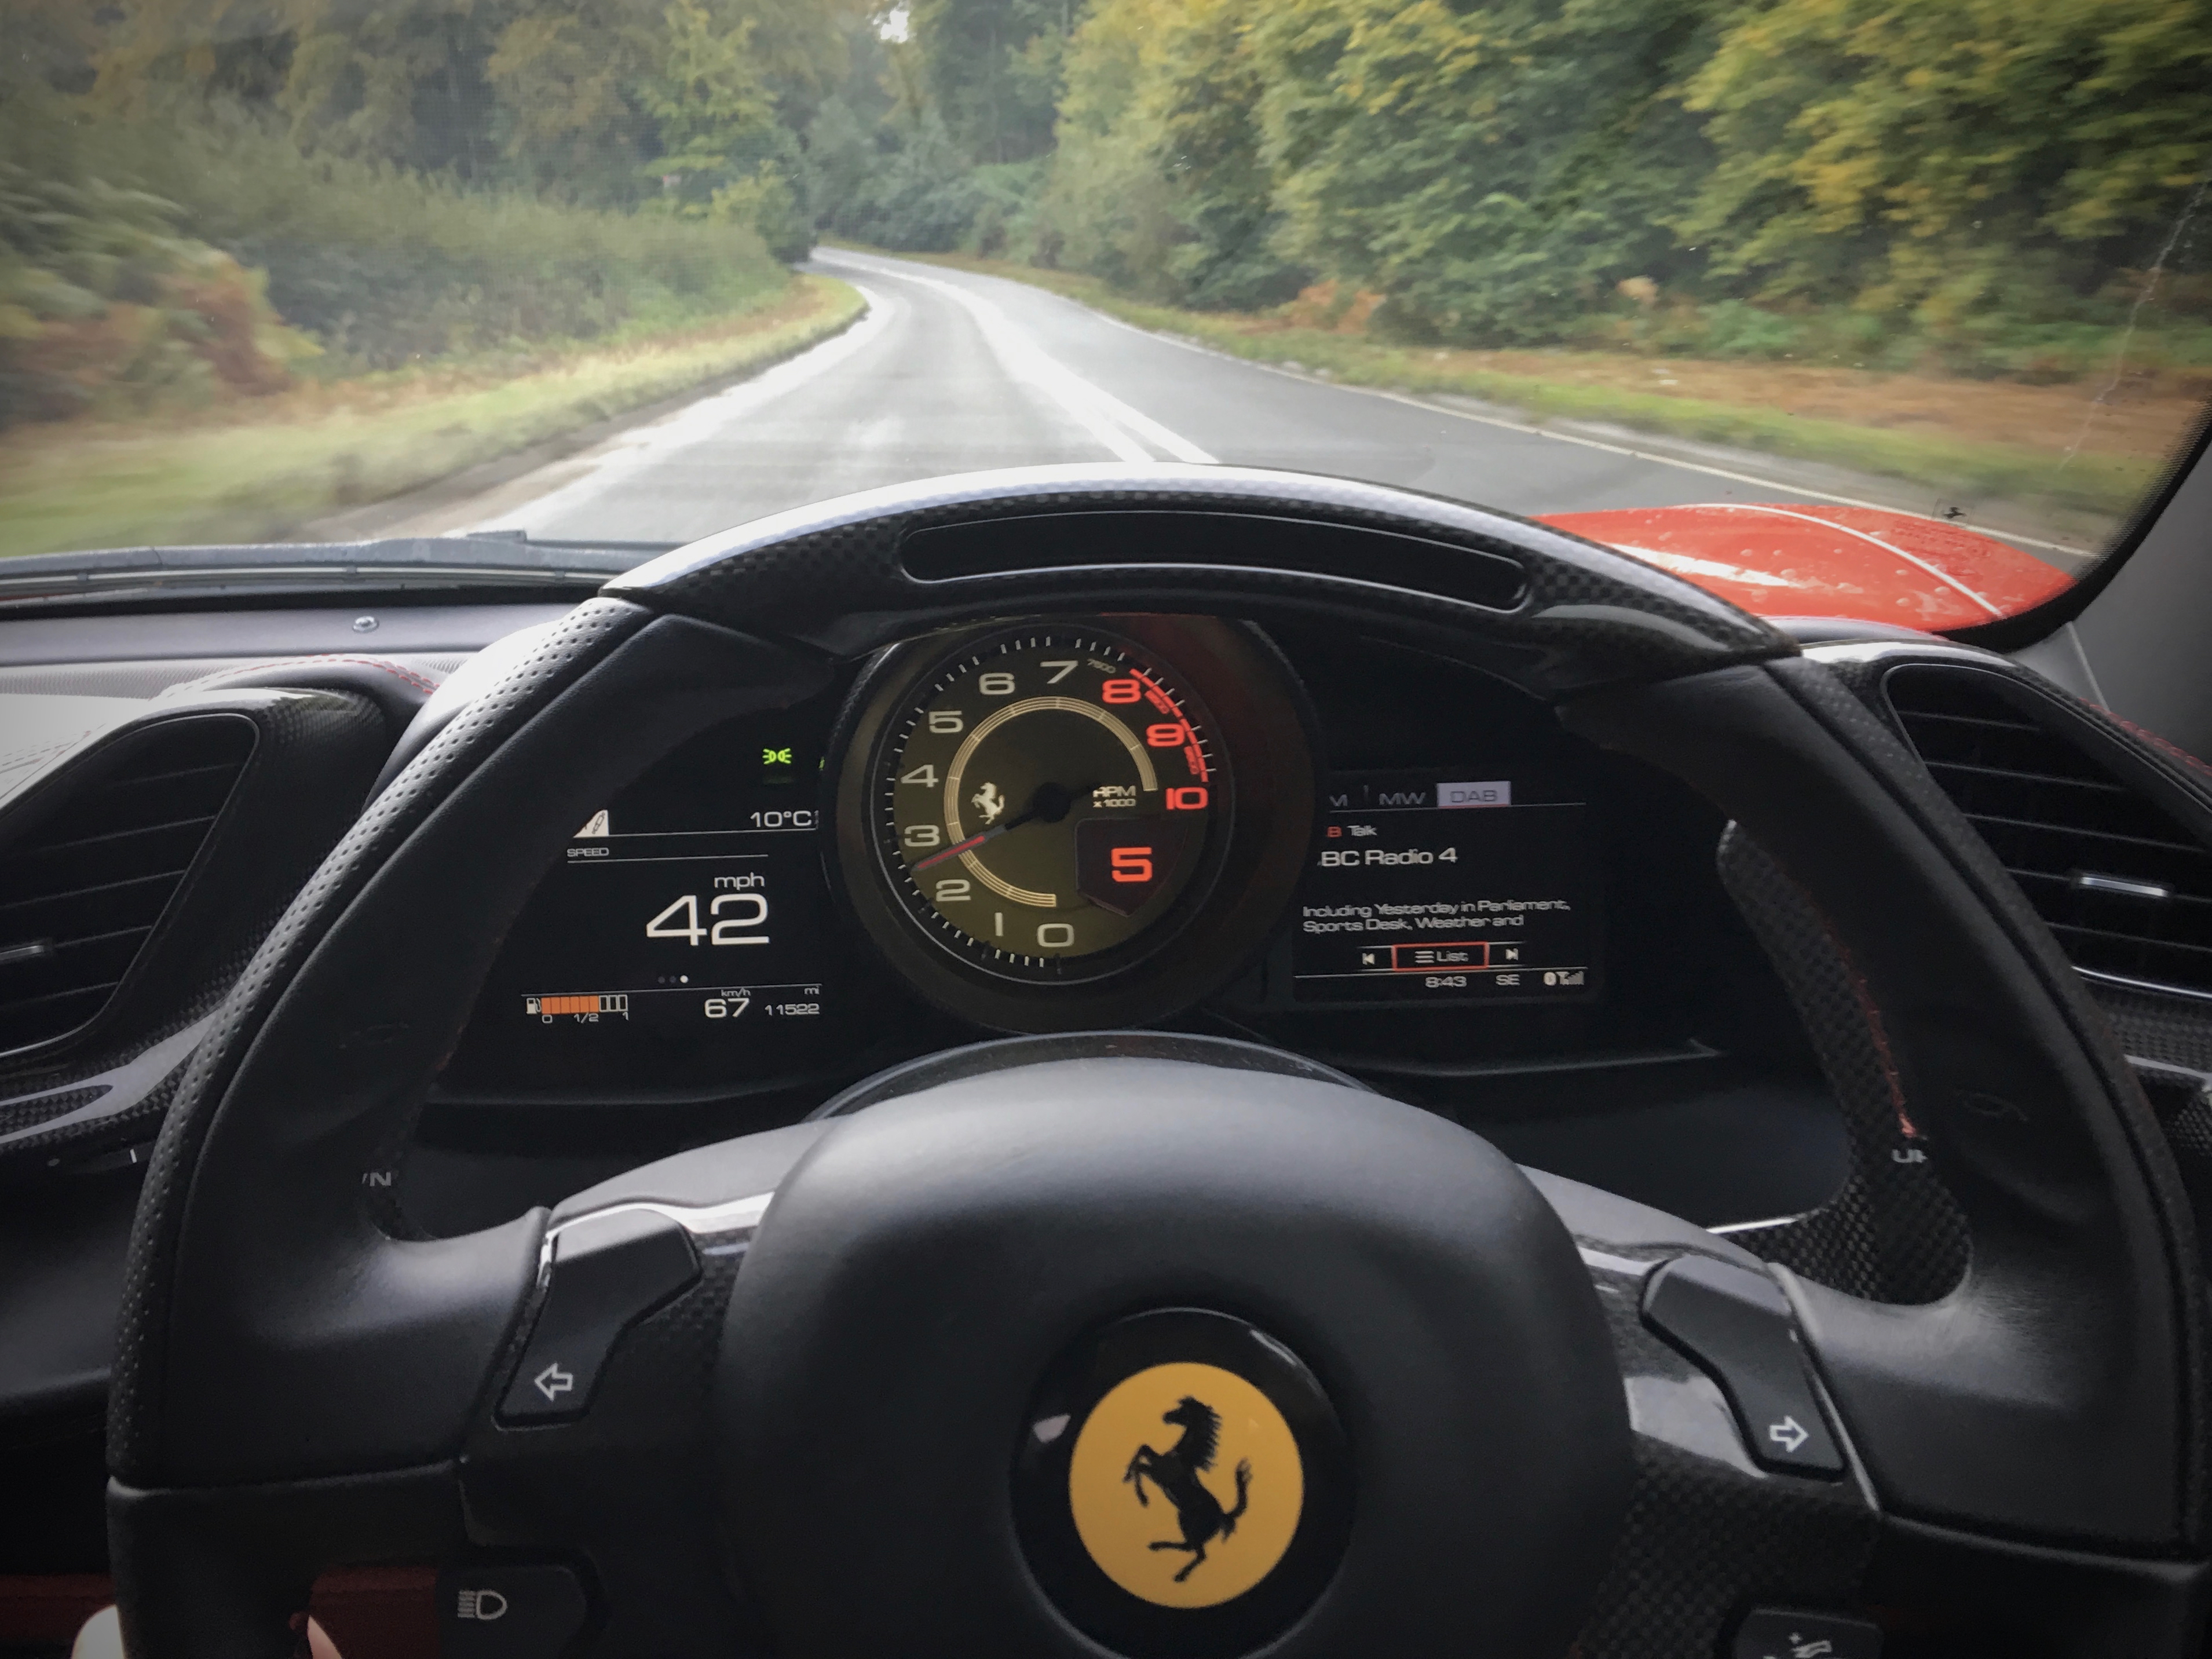 Supersport Supercars: Wrapping up the Caterham series with a Ferrari 488 GTB